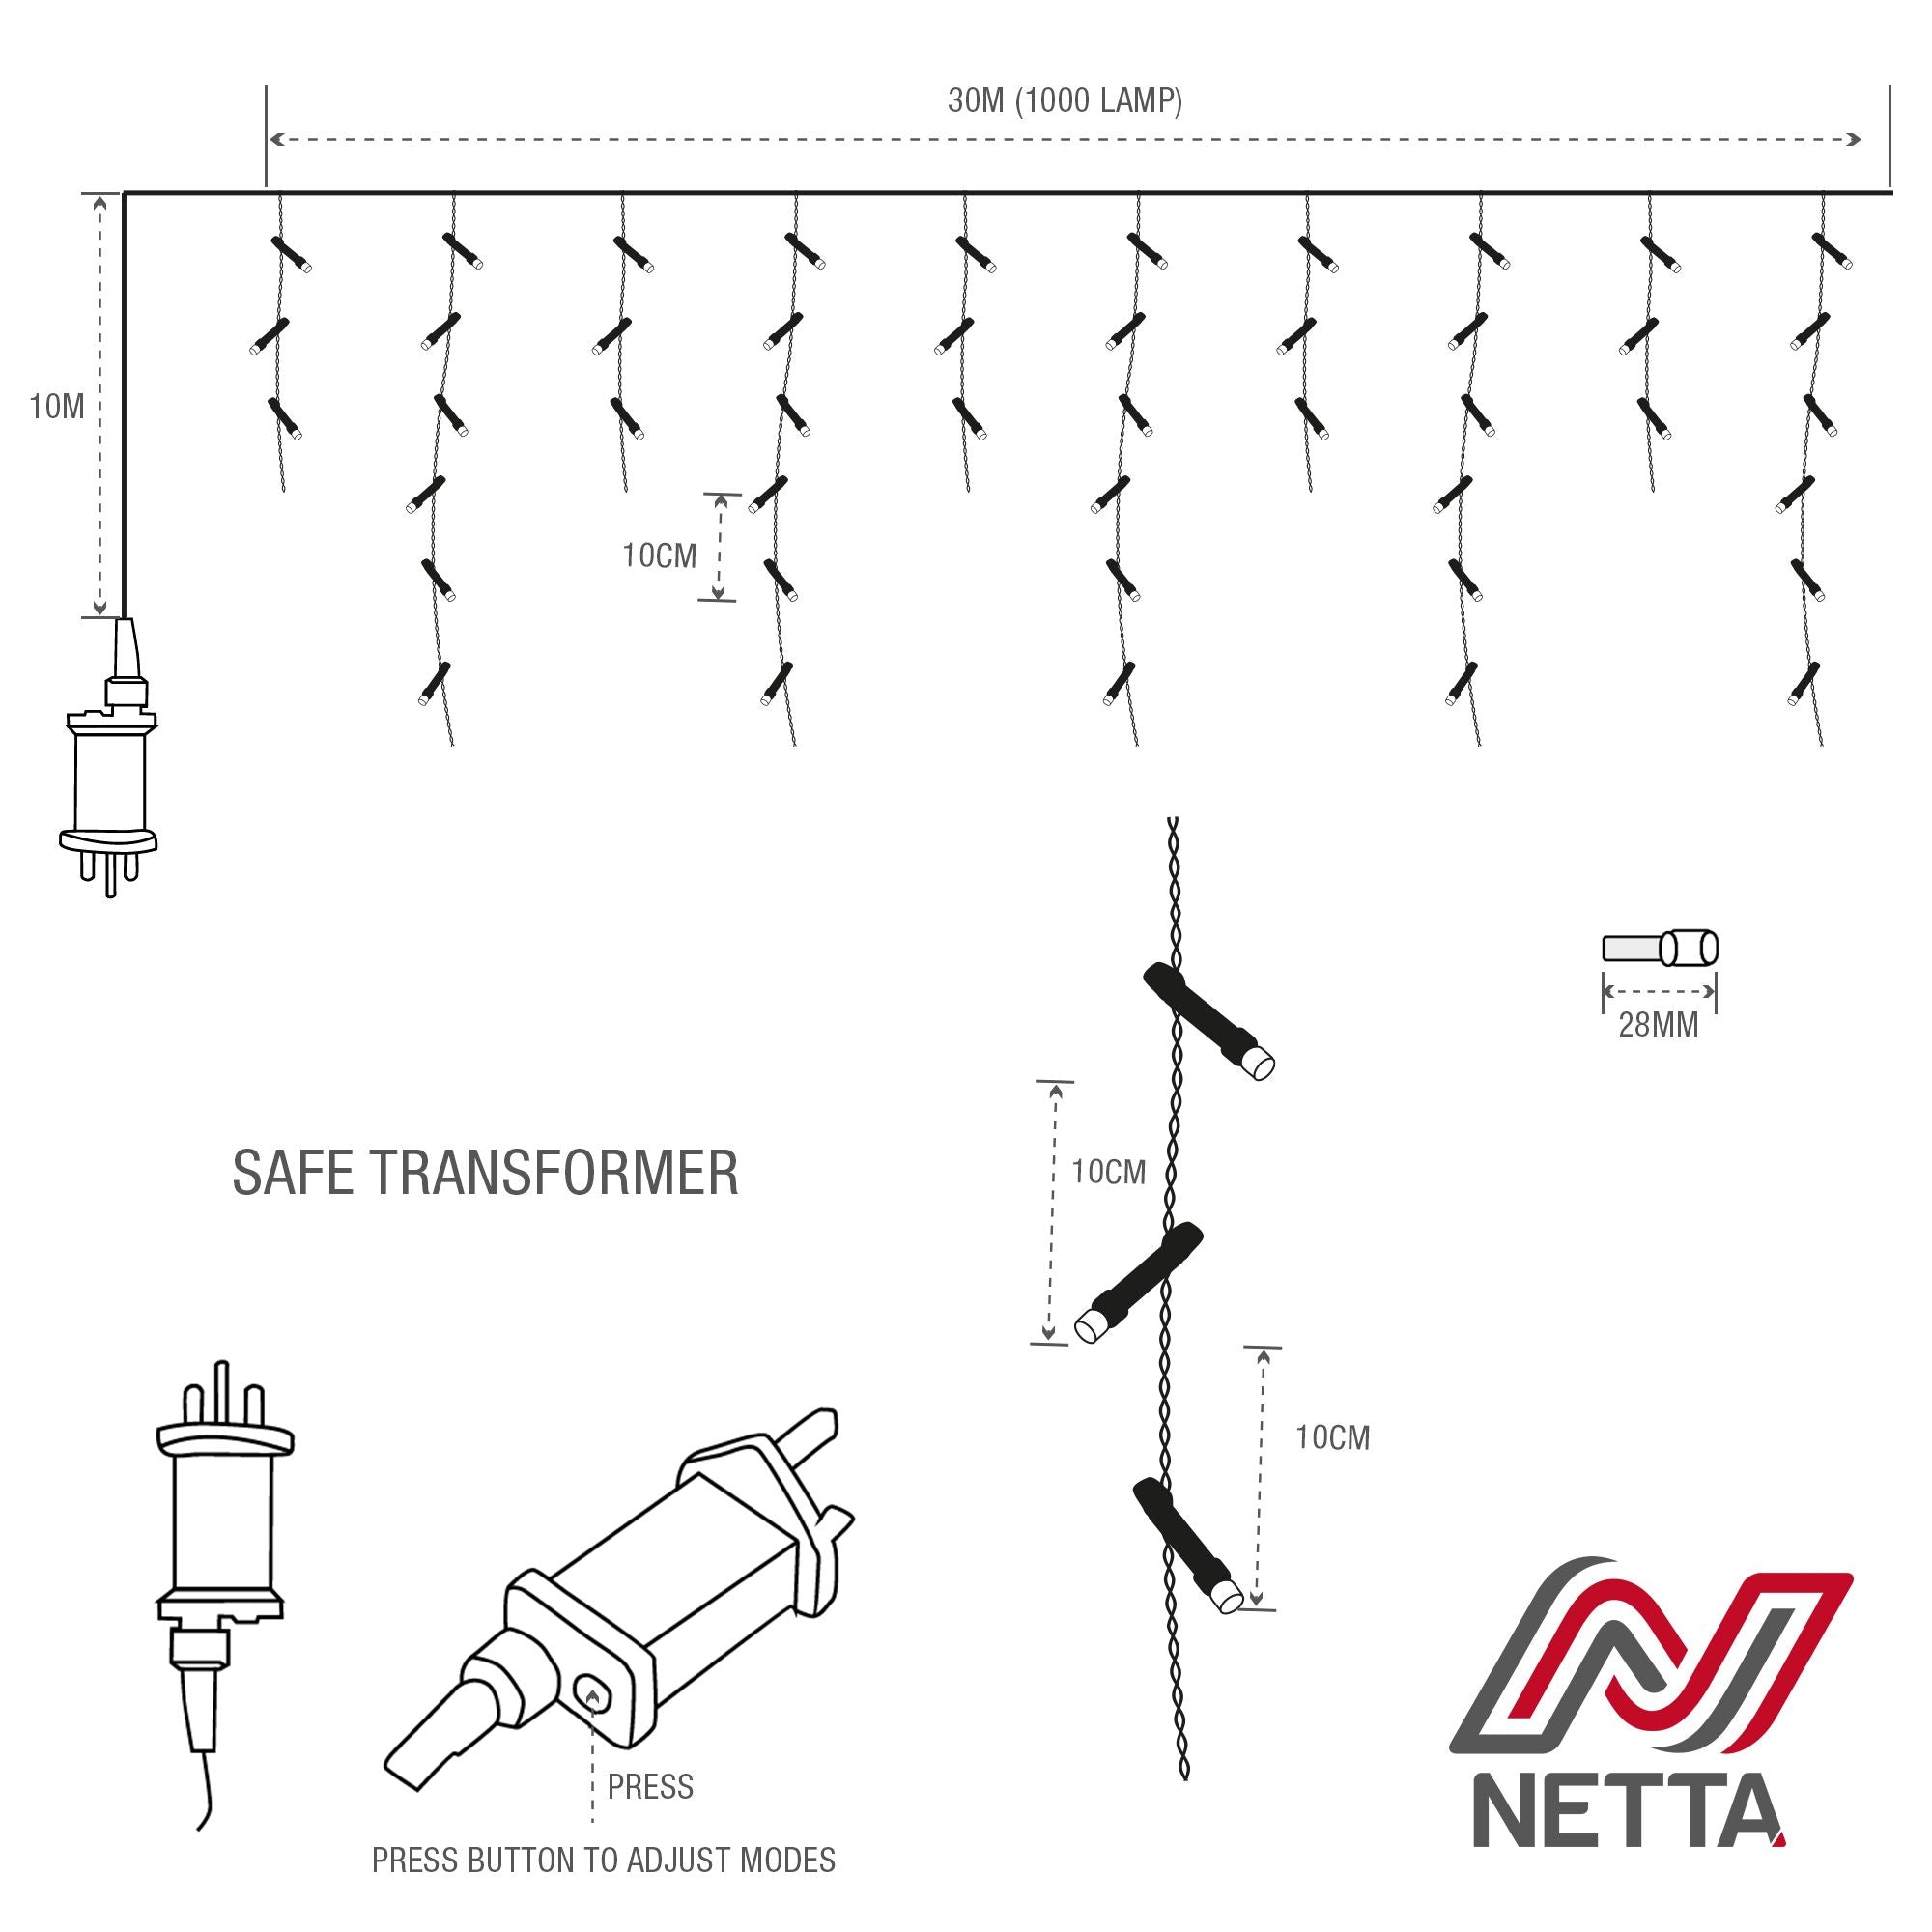 NETTA 1000LED Icicle String Lights - Warm White & Cool White, with White Cable